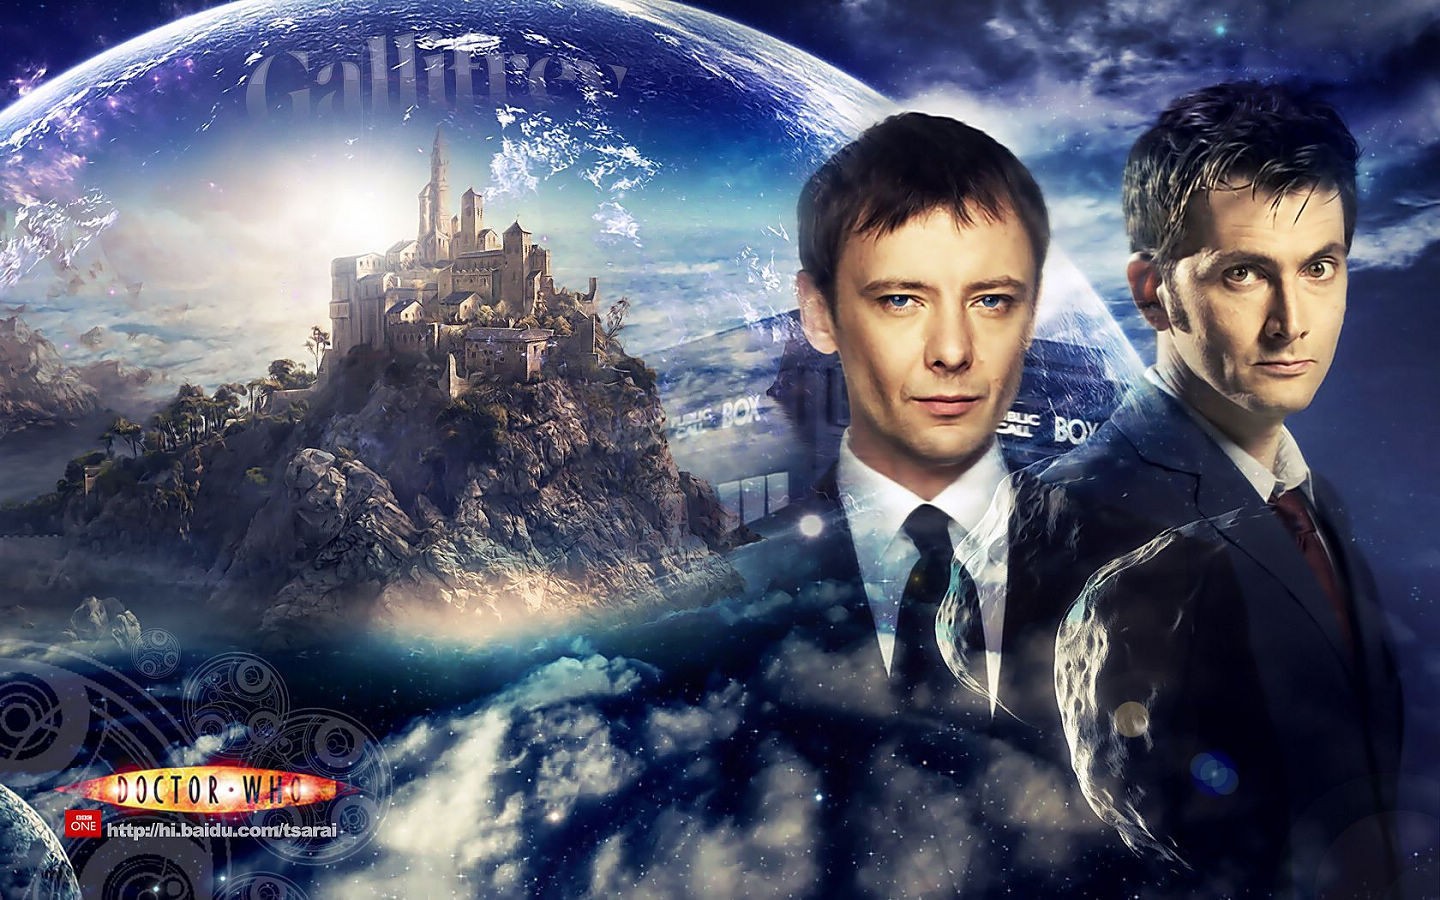 General 1440x900 Doctor Who The Doctor TARDIS David Tennant The Master gallifrey John Simm Tenth Doctor TV series science fiction